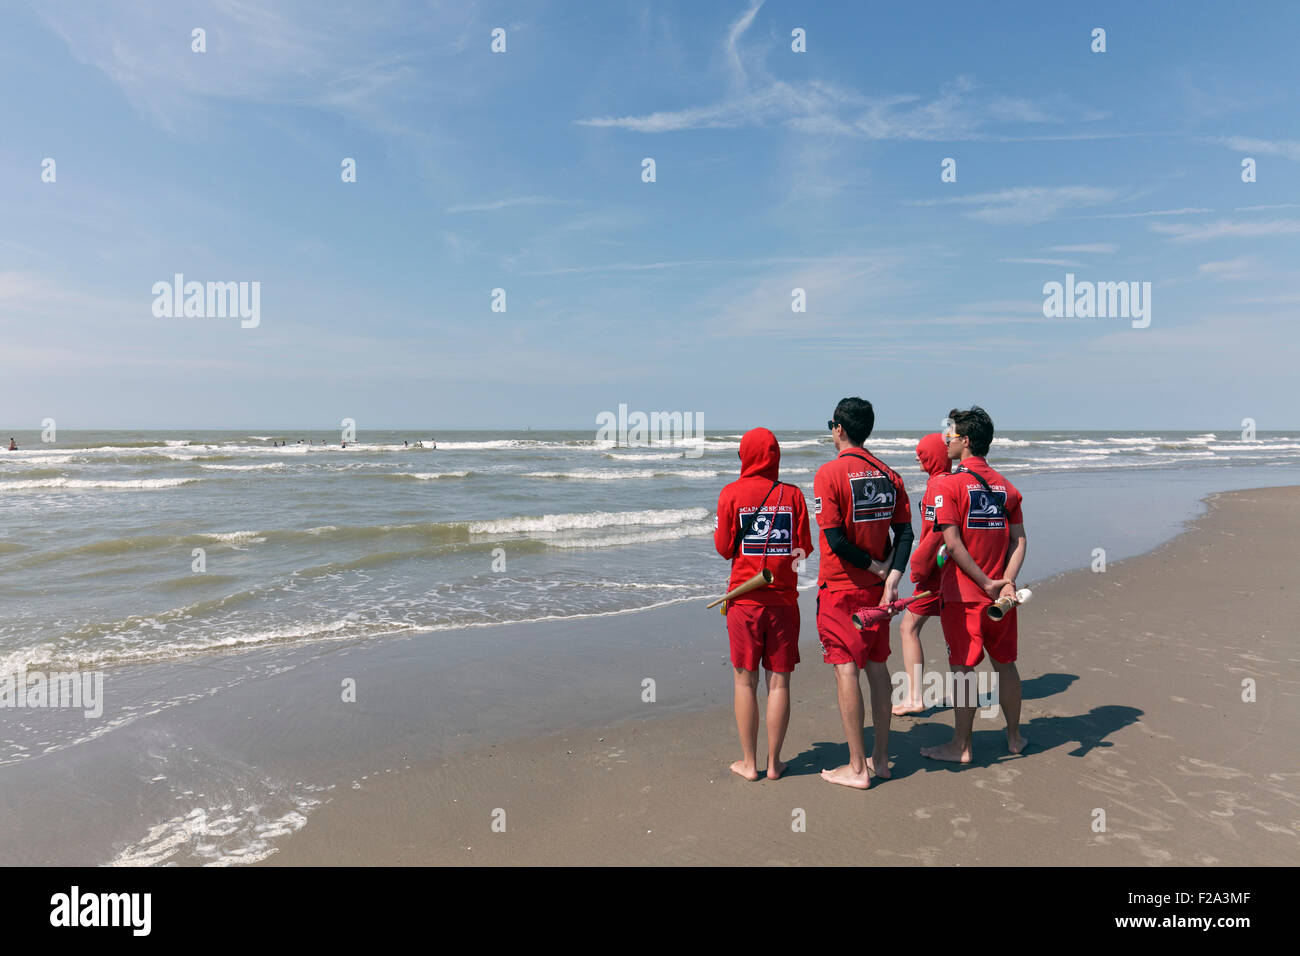 Four young lifeguards observing the sea from the beach, North Sea, Belgian coast, De Haan, West Flanders, Belgium Stock Photo